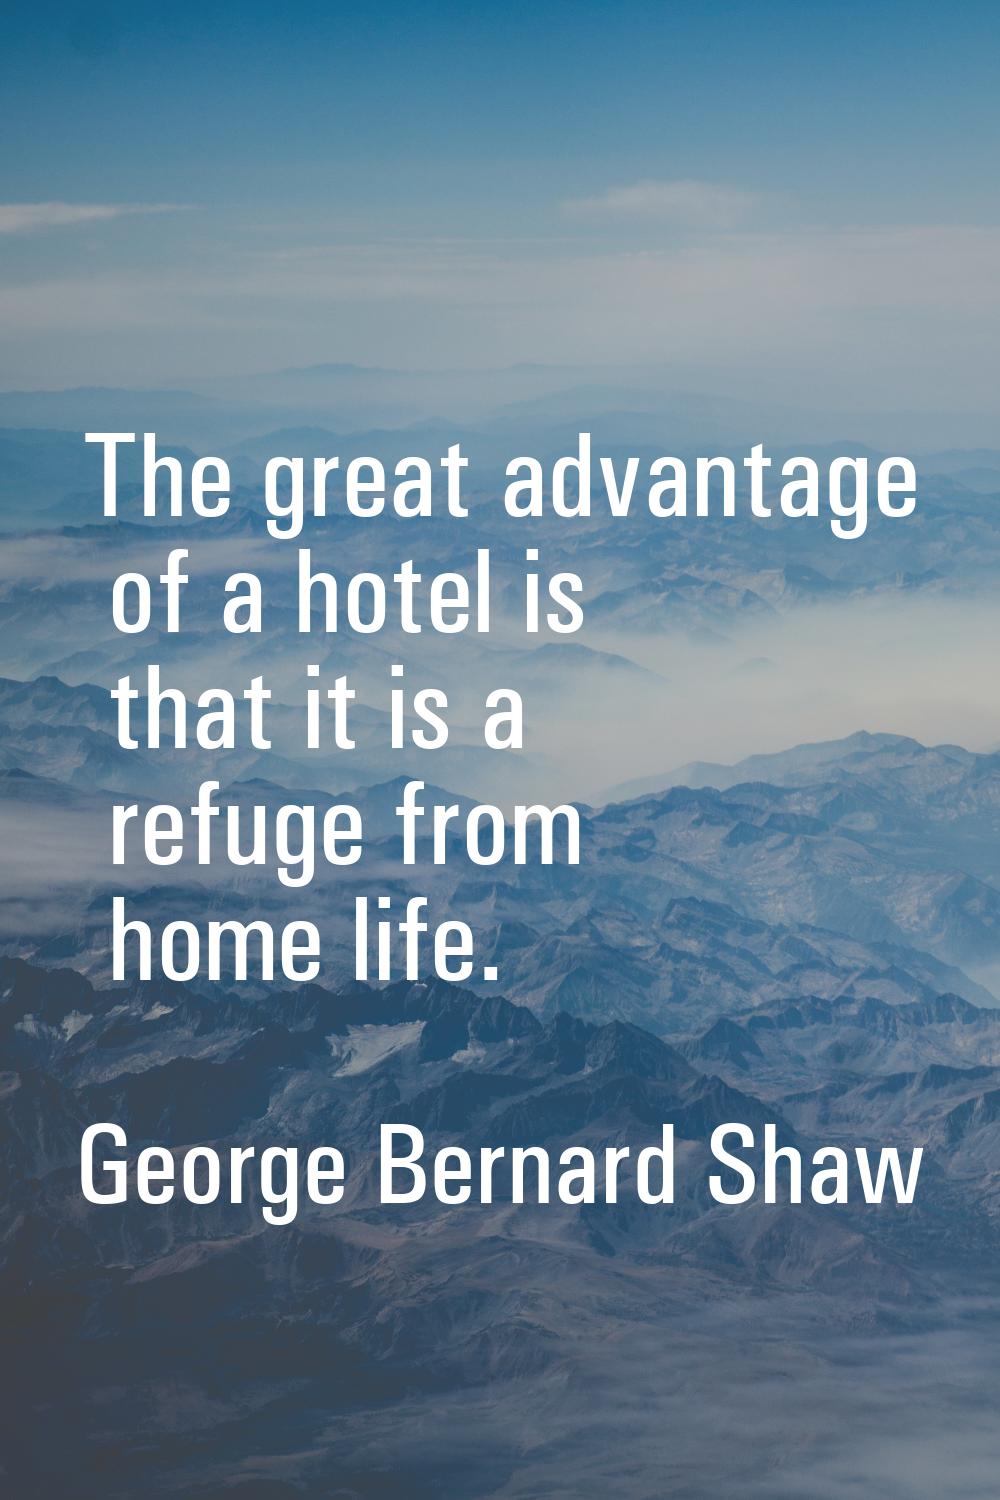 The great advantage of a hotel is that it is a refuge from home life.